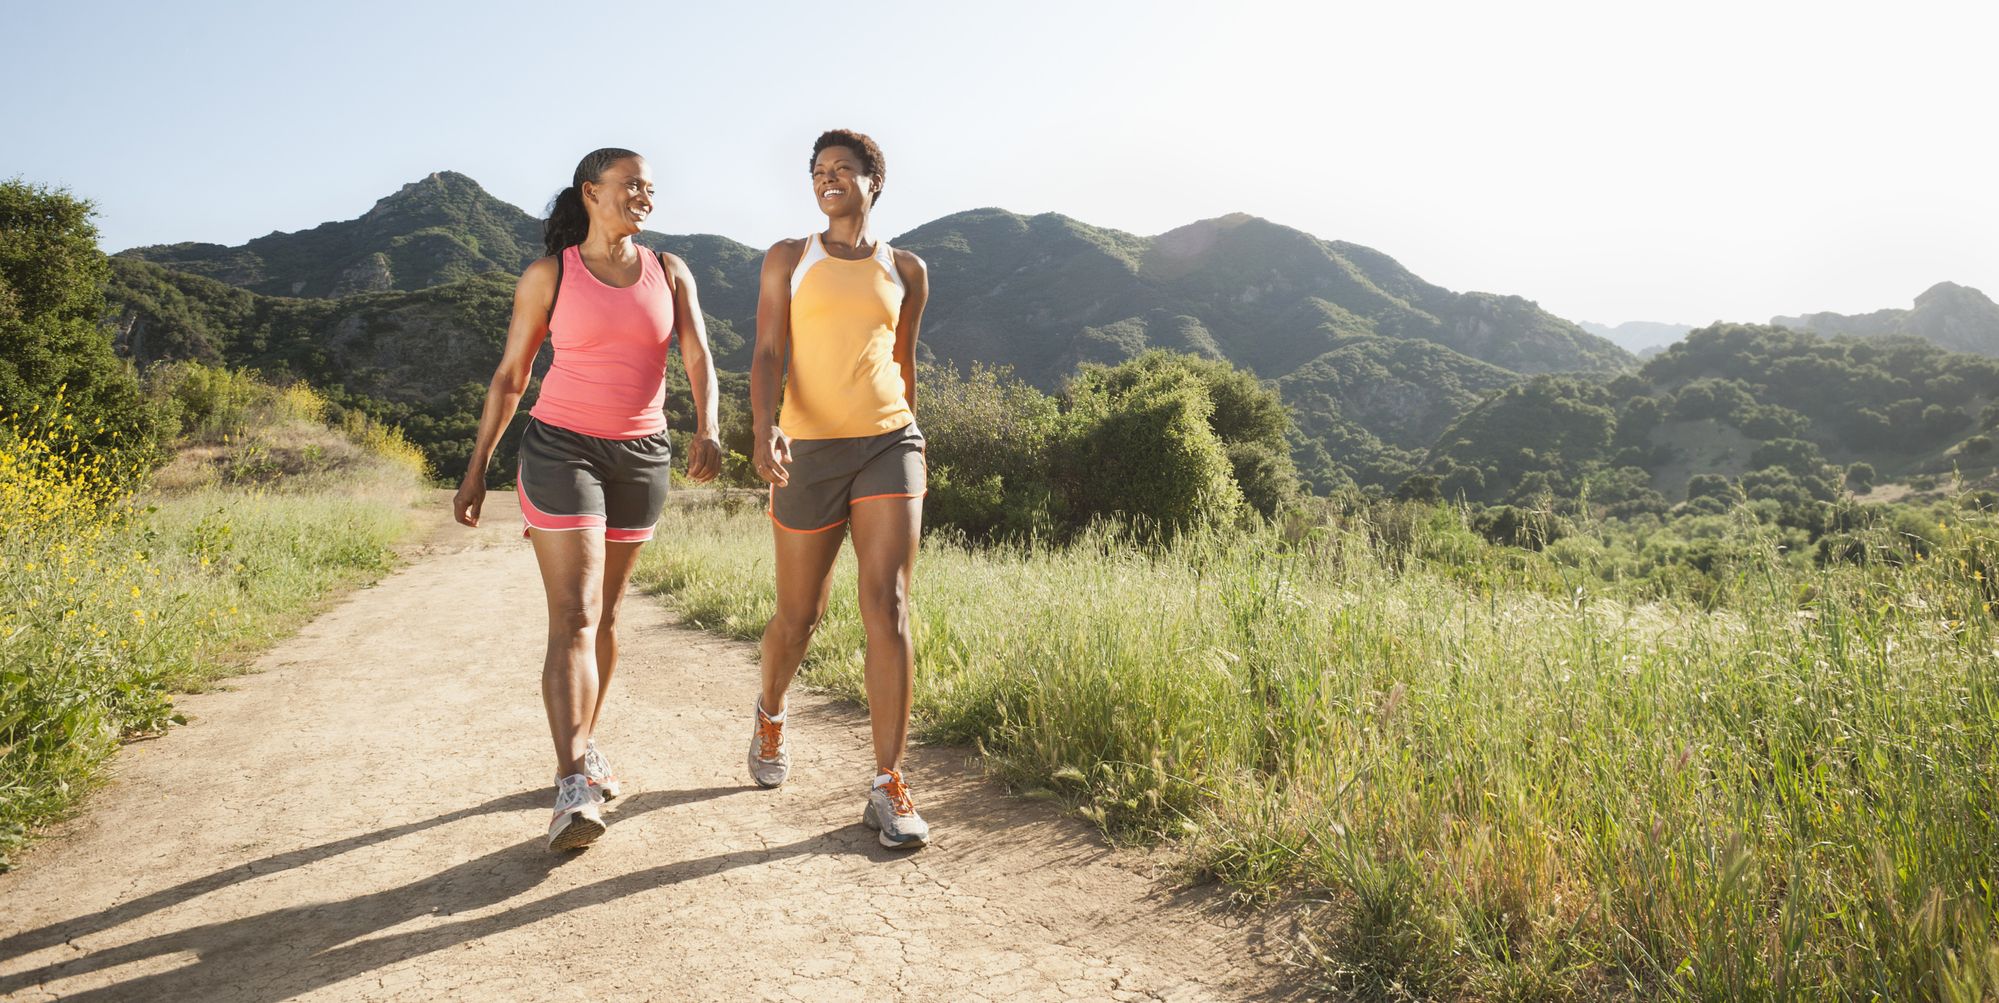 Athletic women walking together on remote trail